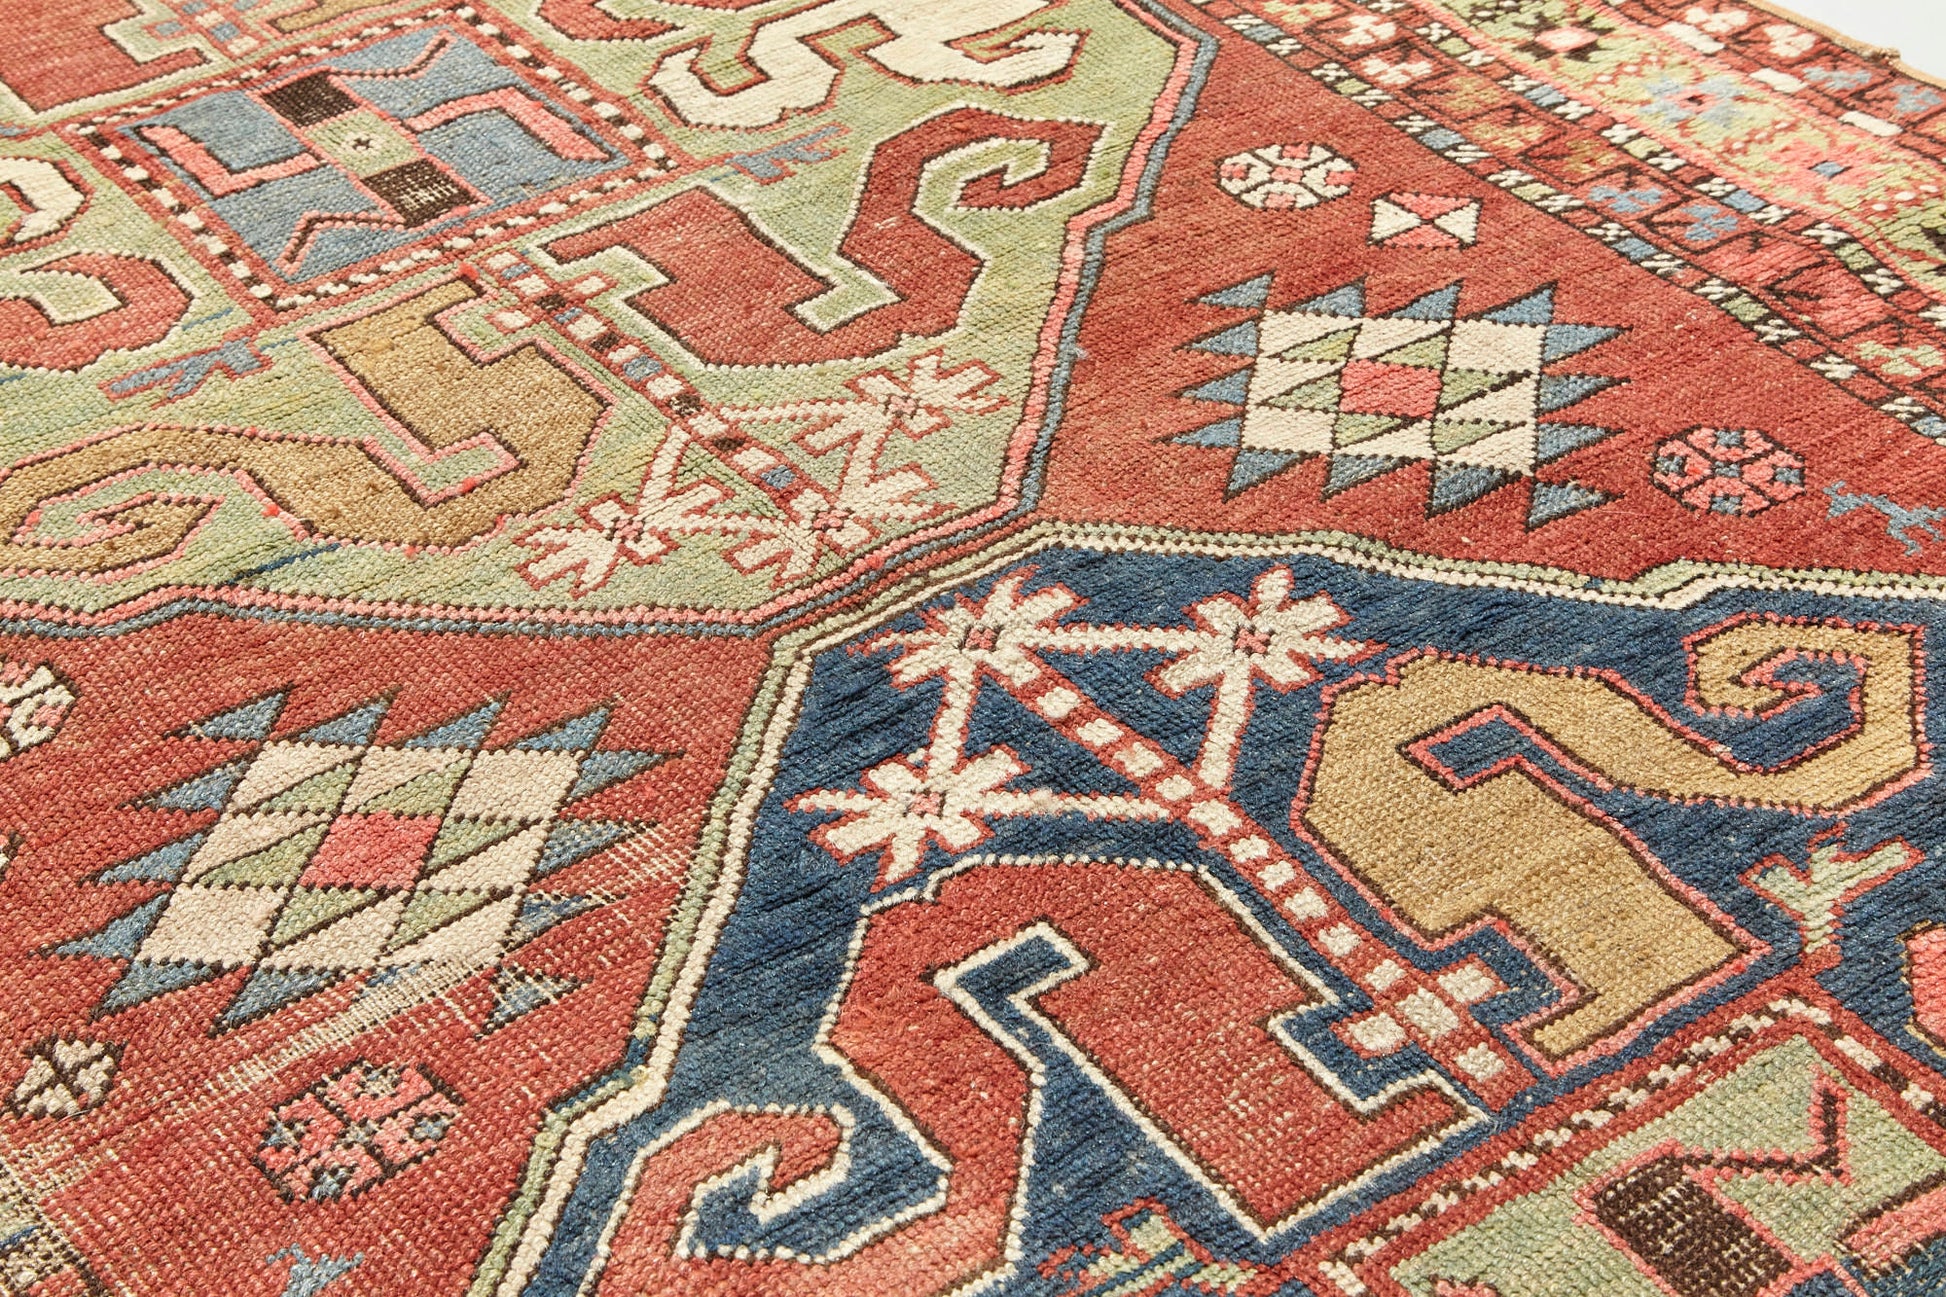 Detail of Kazak Cloudband antique Persian rug with rich pink base and two large medallion designs in the center, one pale green, one blue with pink, red, gold, cream and blue designs intricately hand woven throughout. A beautiful piece for a bedroom, hallway, dining room or study - Available from King Kennedy Rugs Los Angeles